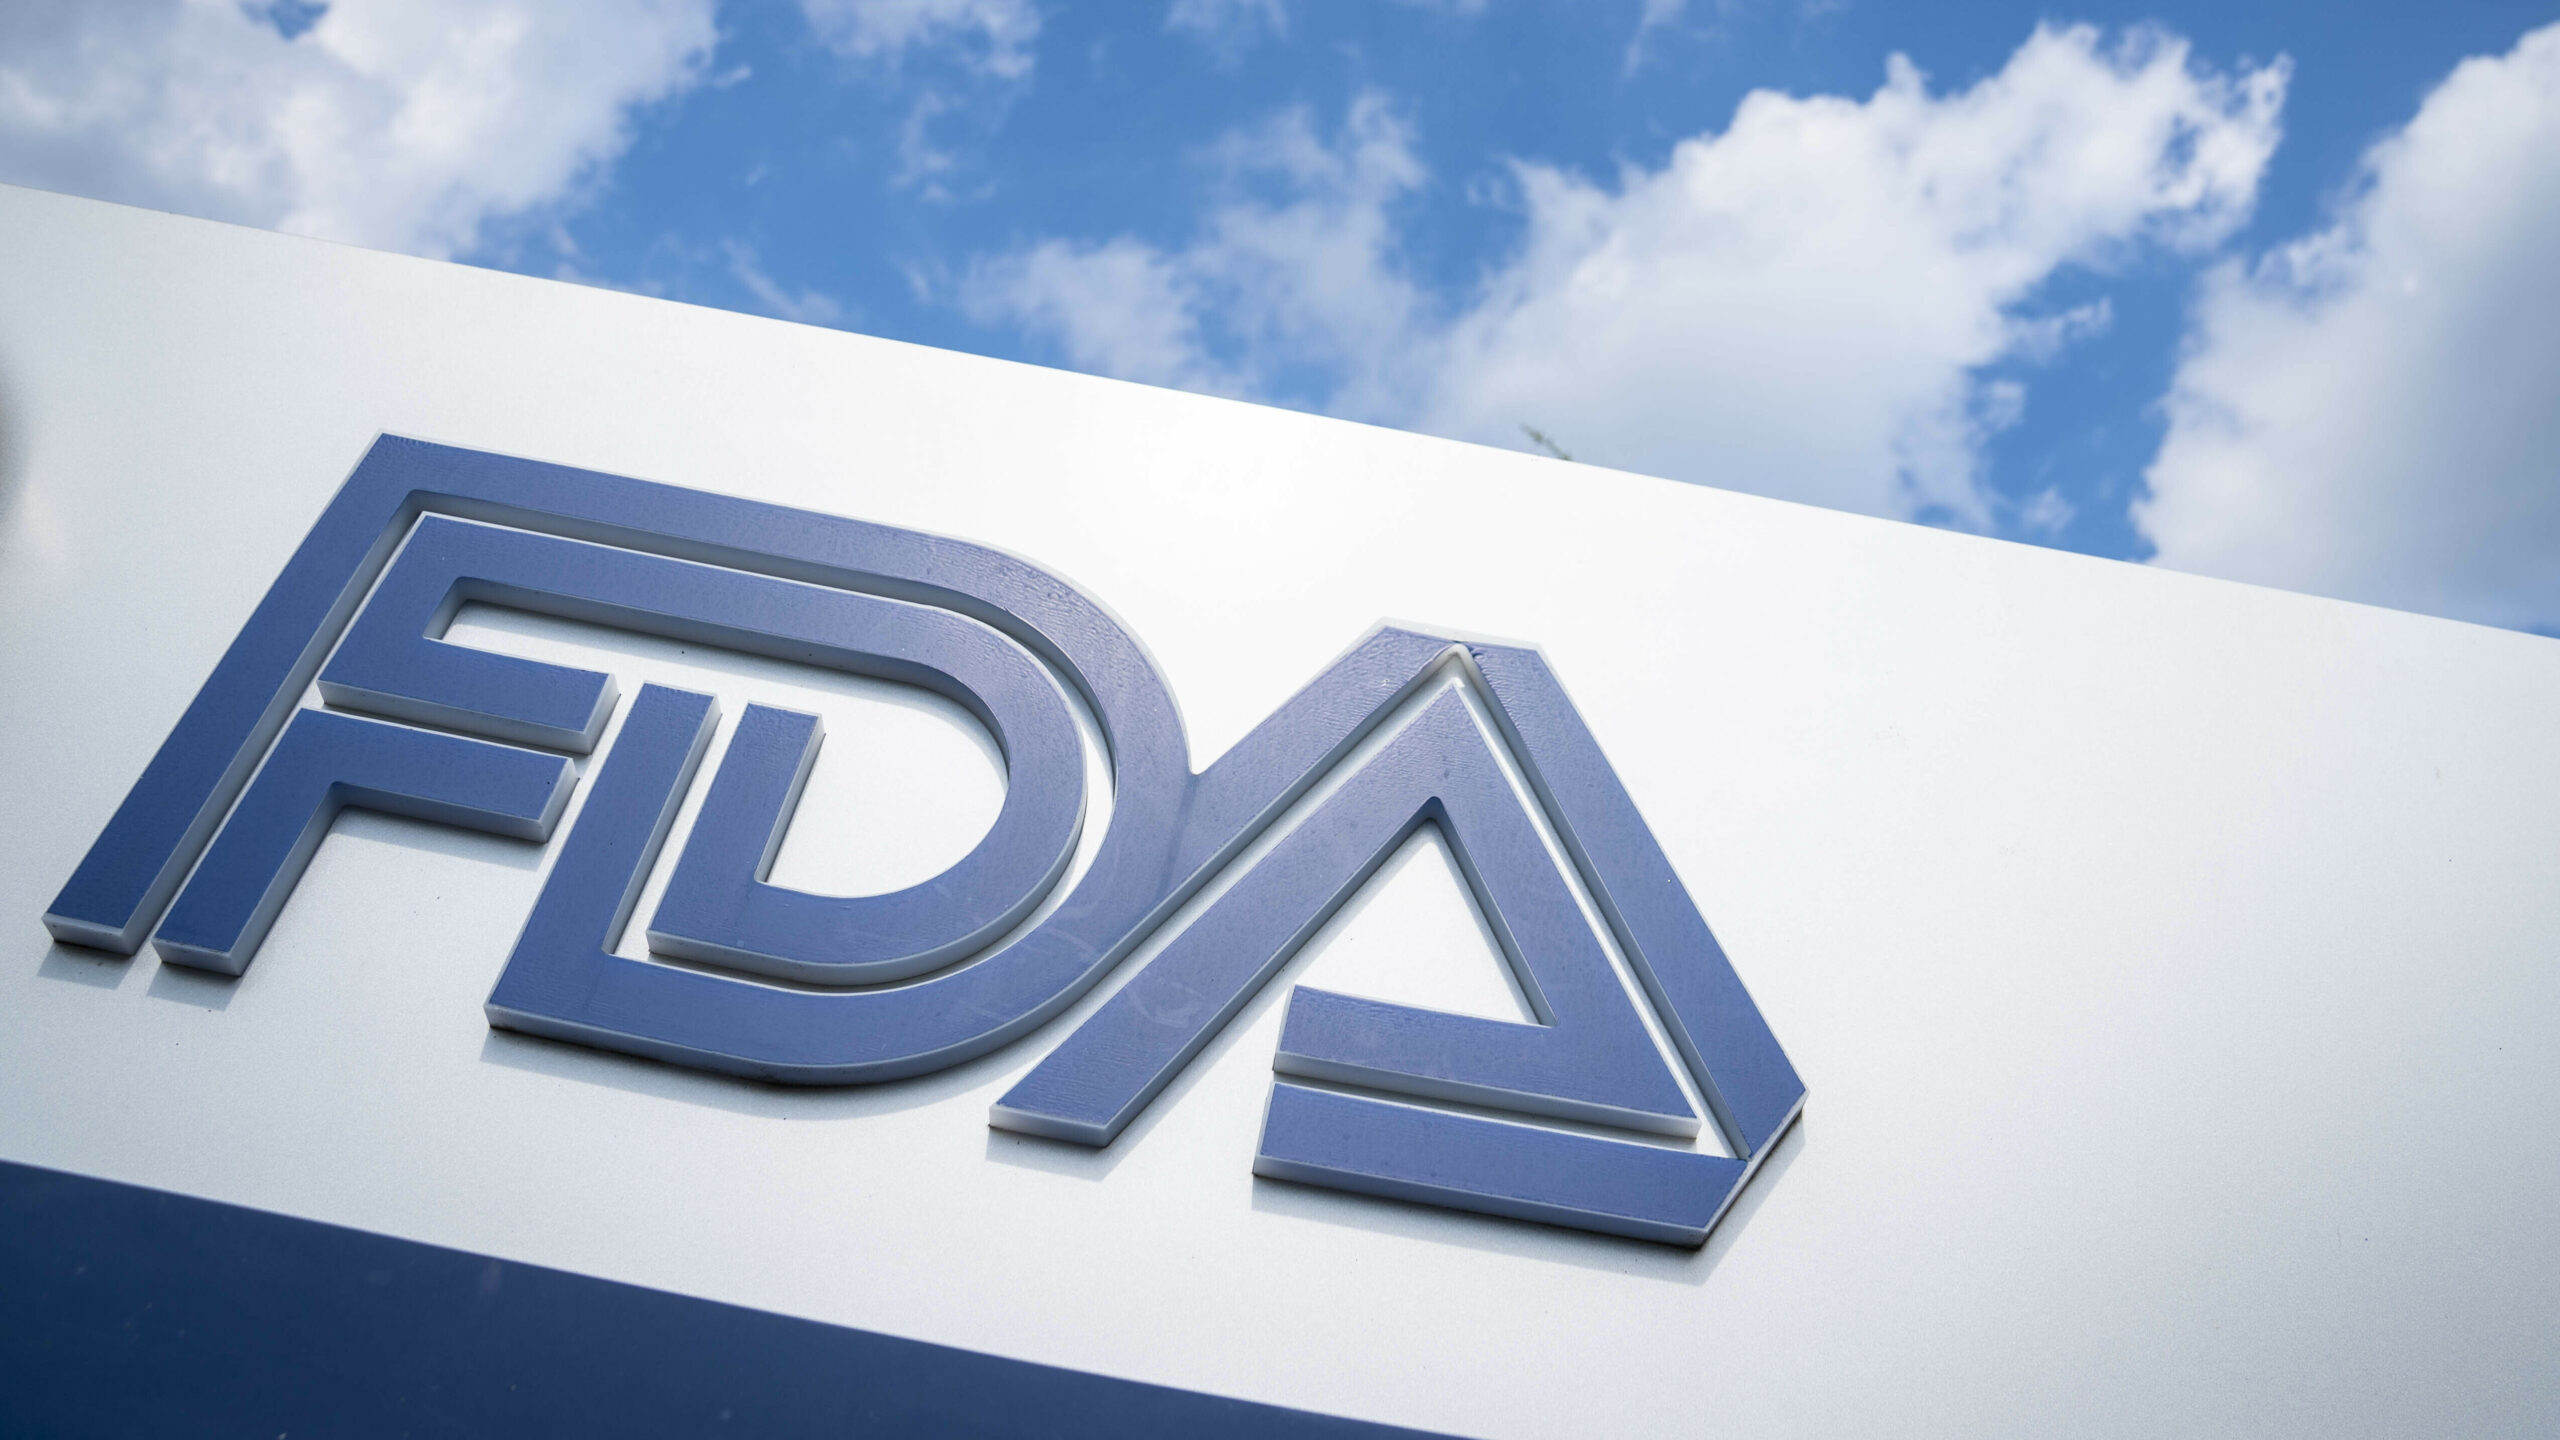 FDA approves Florida’s plan to import cheaper drugs from Canada